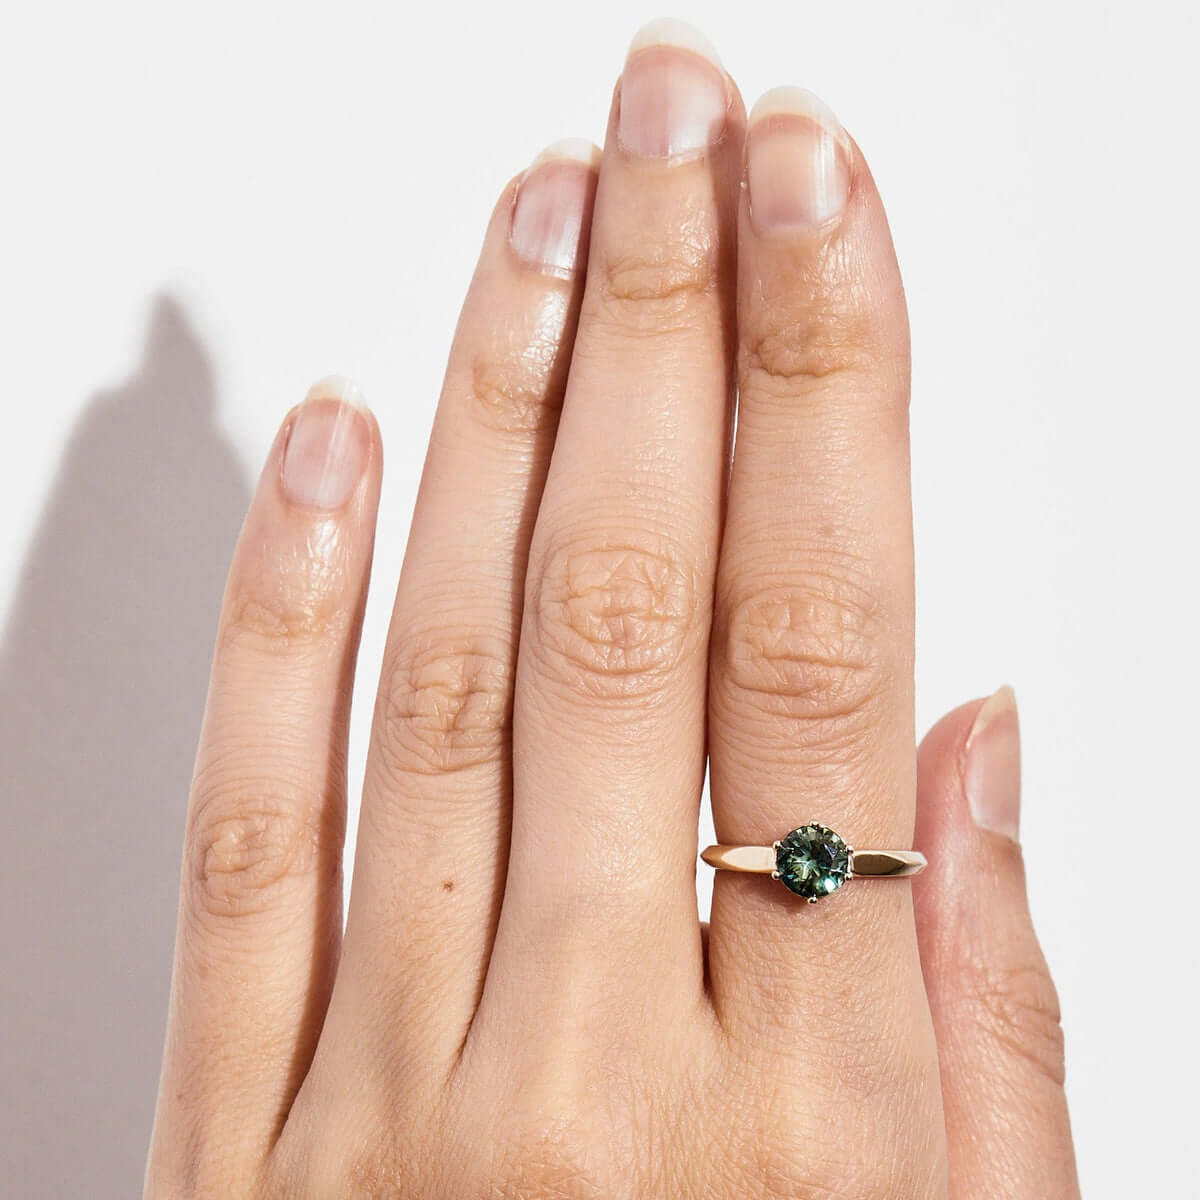 A hand with a beautiful yellow gold ring with a round green Australian sapphire.